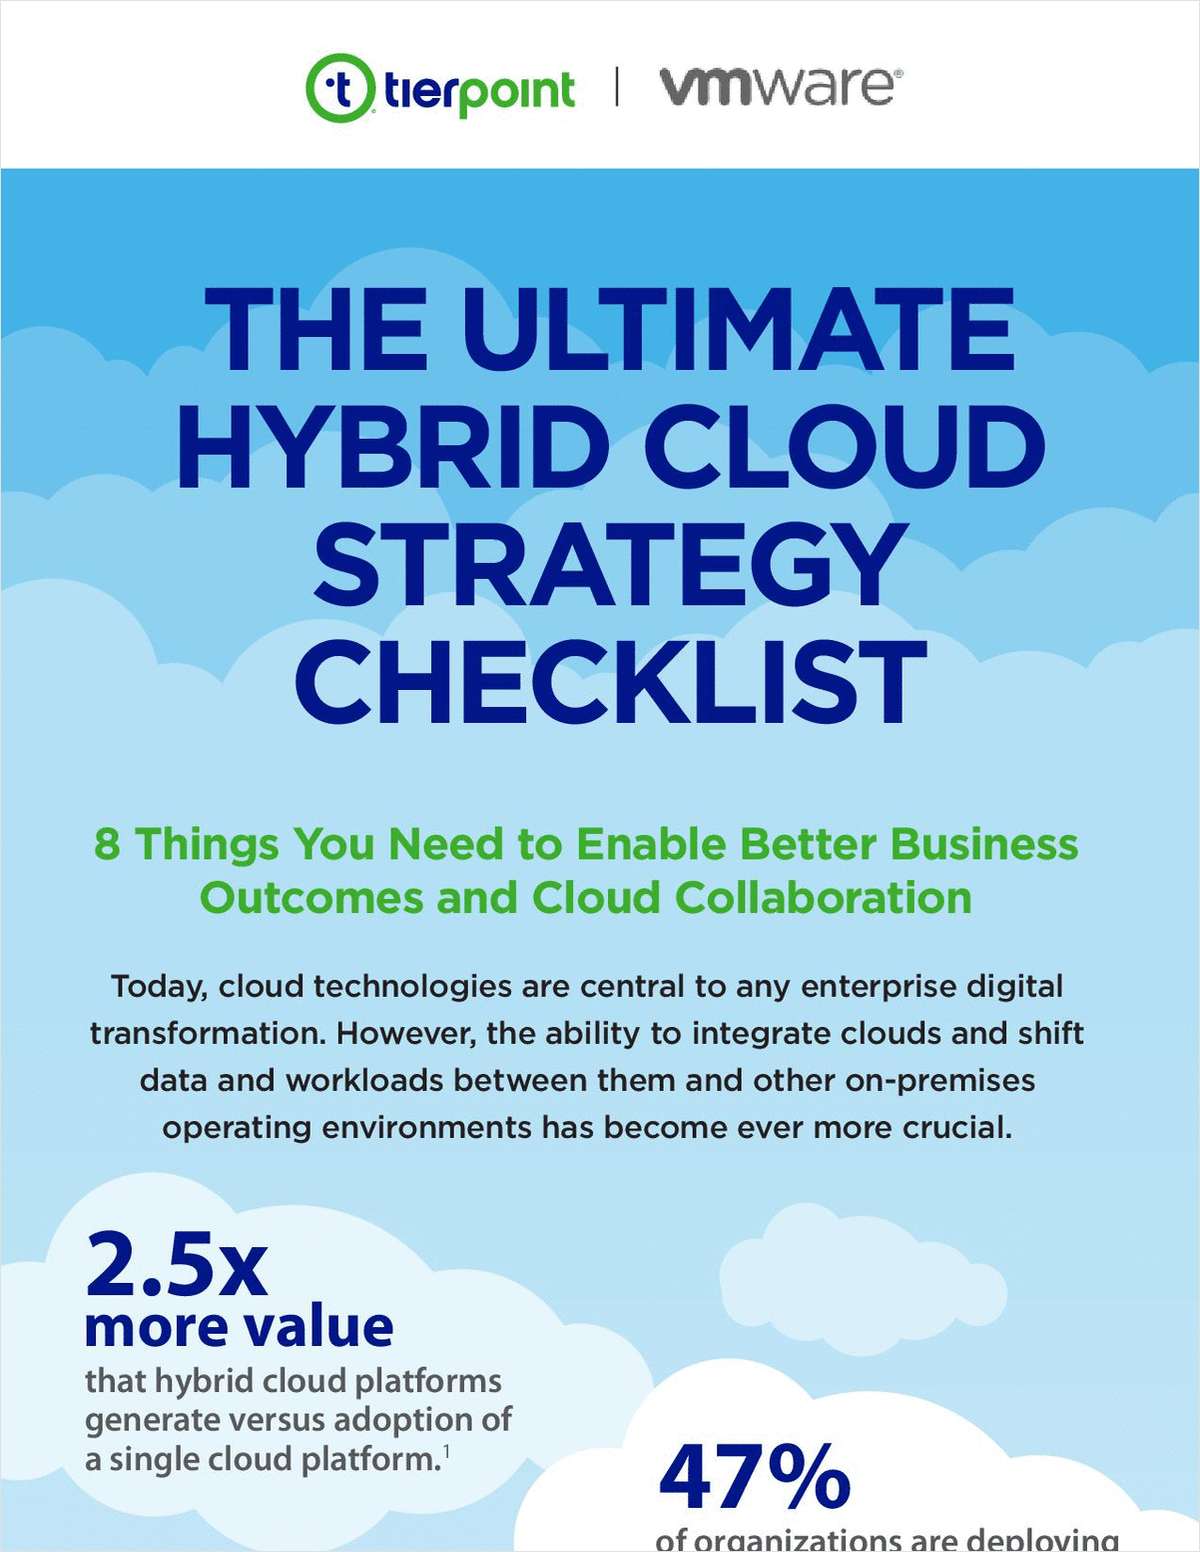 The Ultimate Hybrid Cloud Strategy Checklist